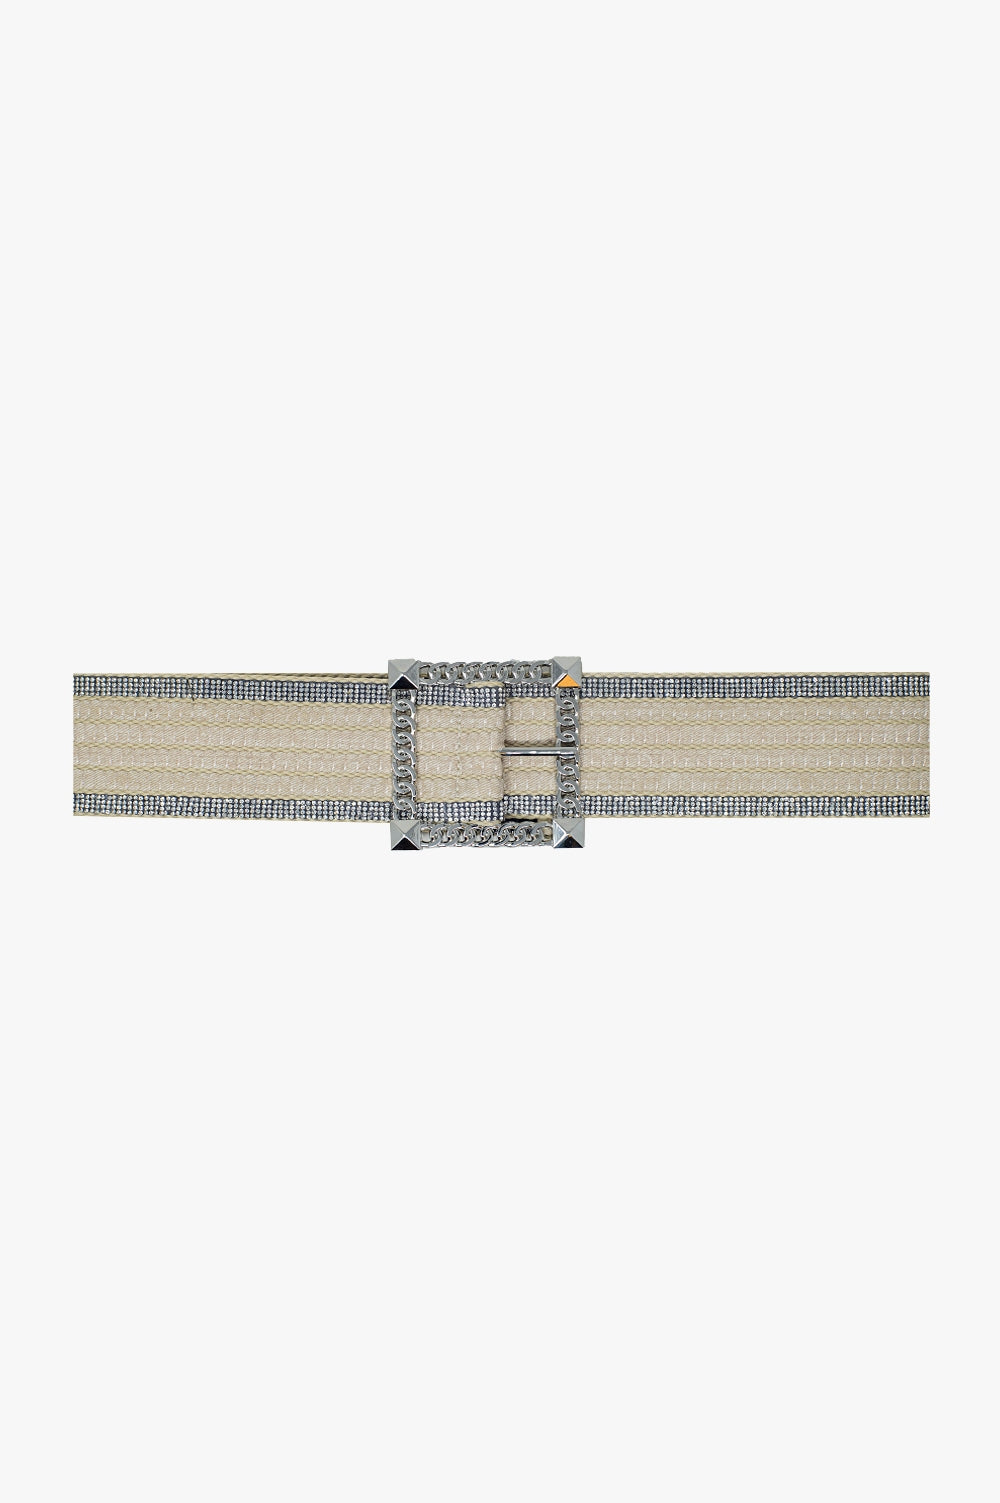 Q2 White belt woven with rhinestones on the edges and silver square buckle